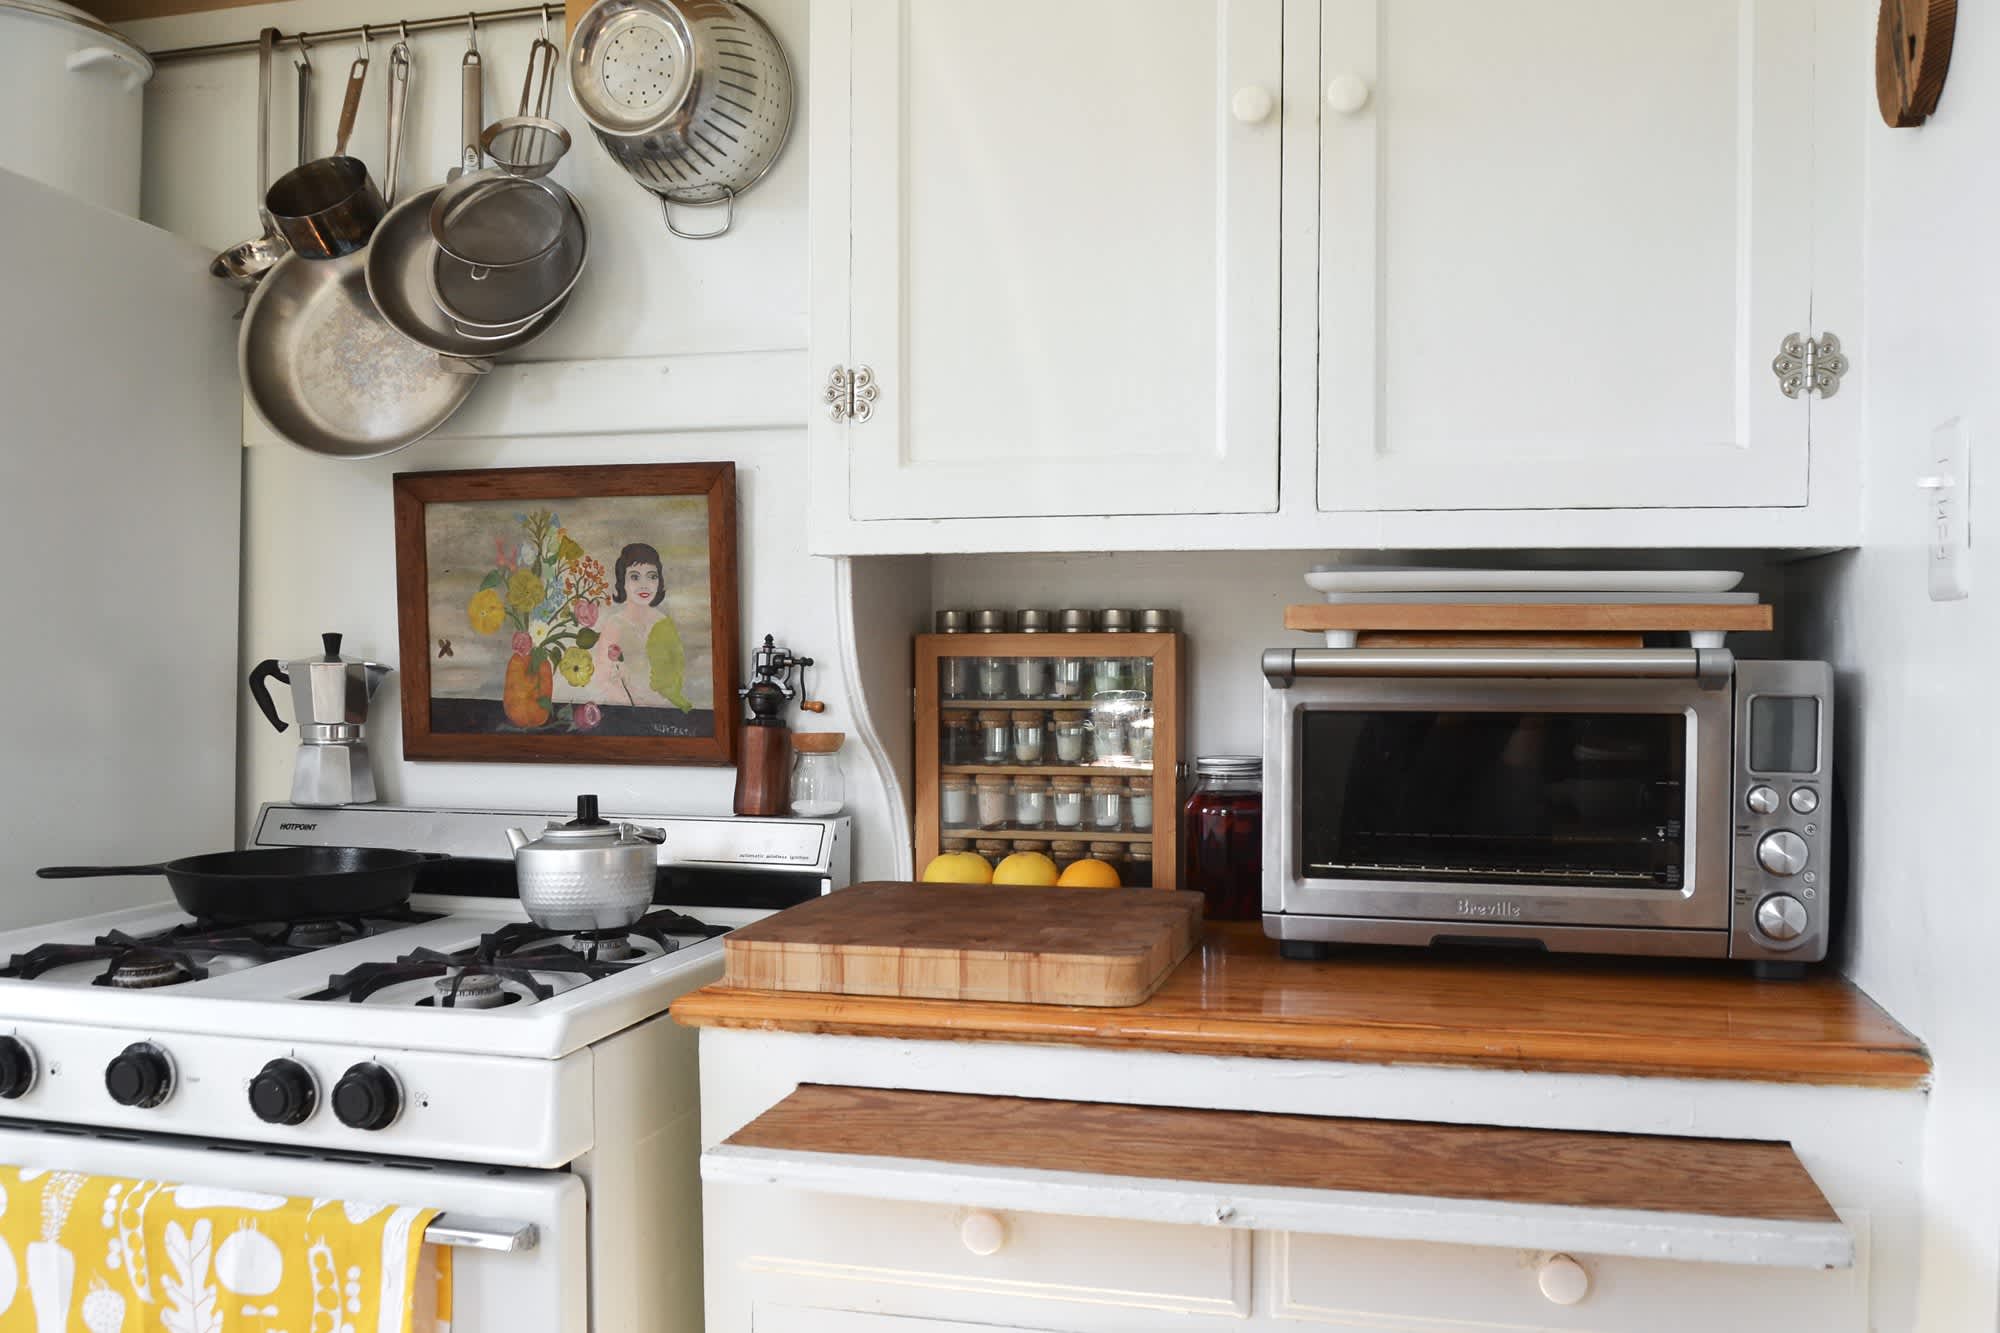 What To Do If Have a Range Hood or | Kitchn